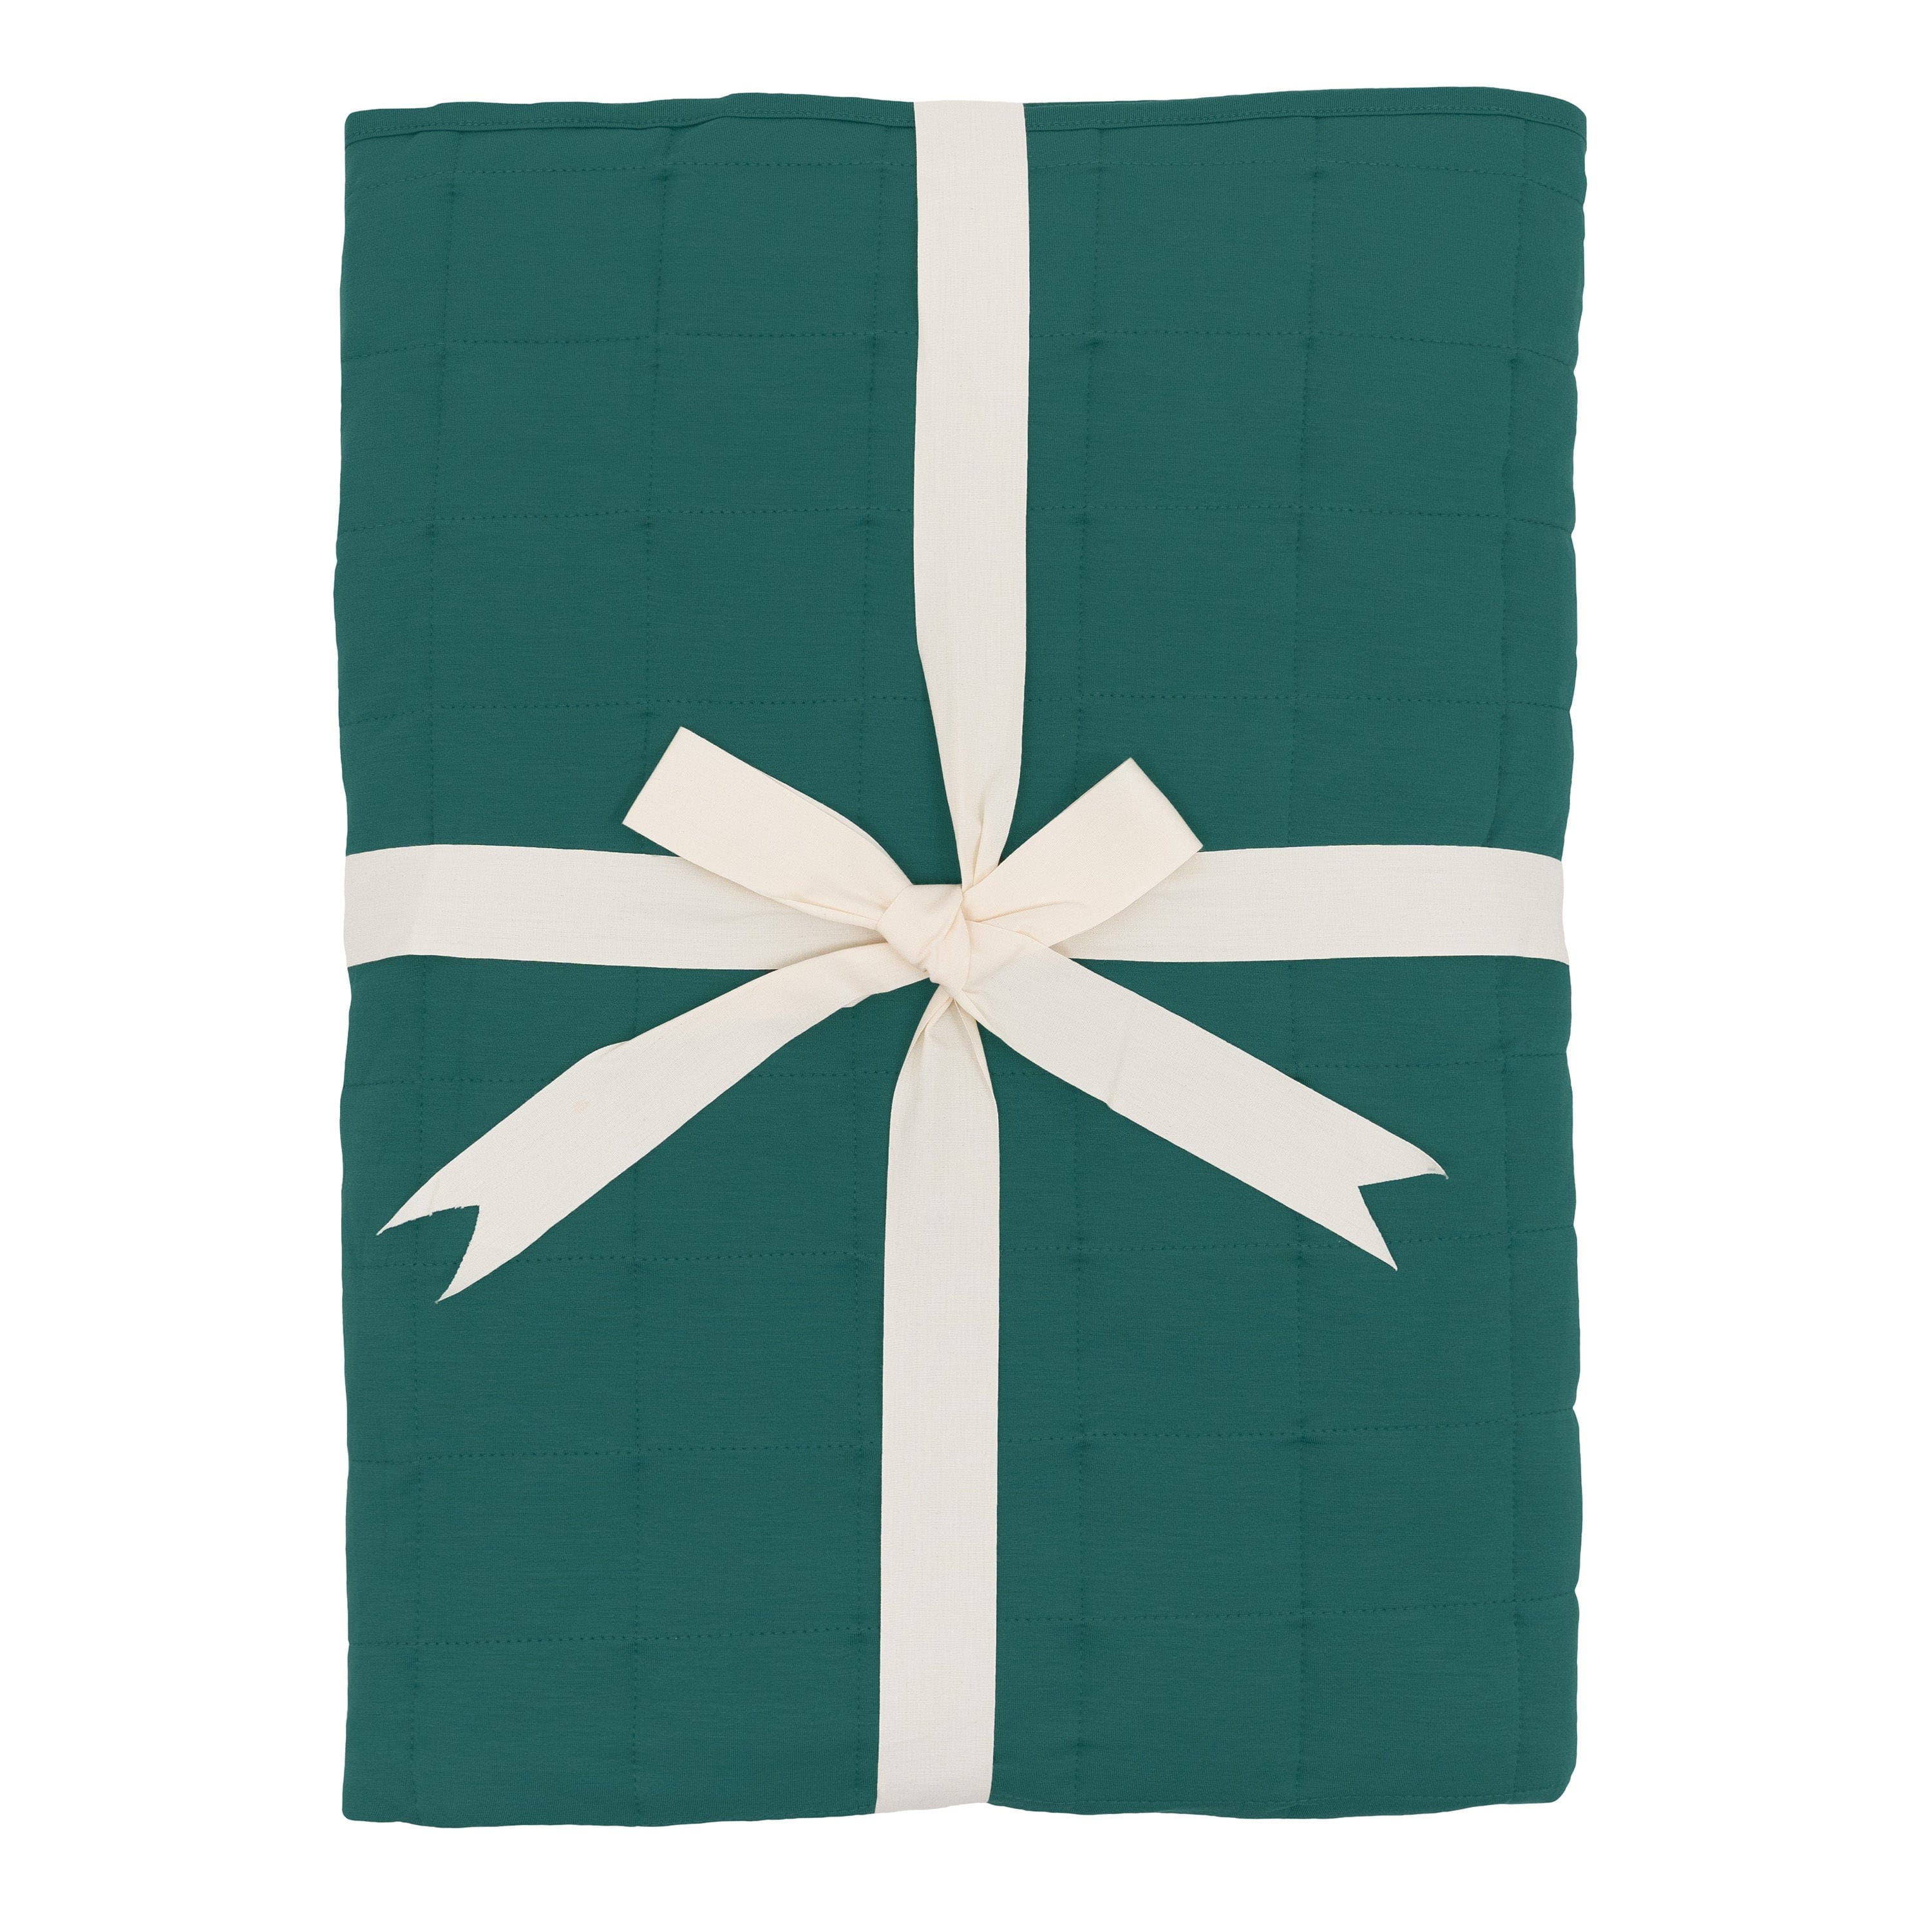 Kyte Baby Youth Blanket 1.0 Tog Emerald / Youth Youth Blanket in Emerald 1.0